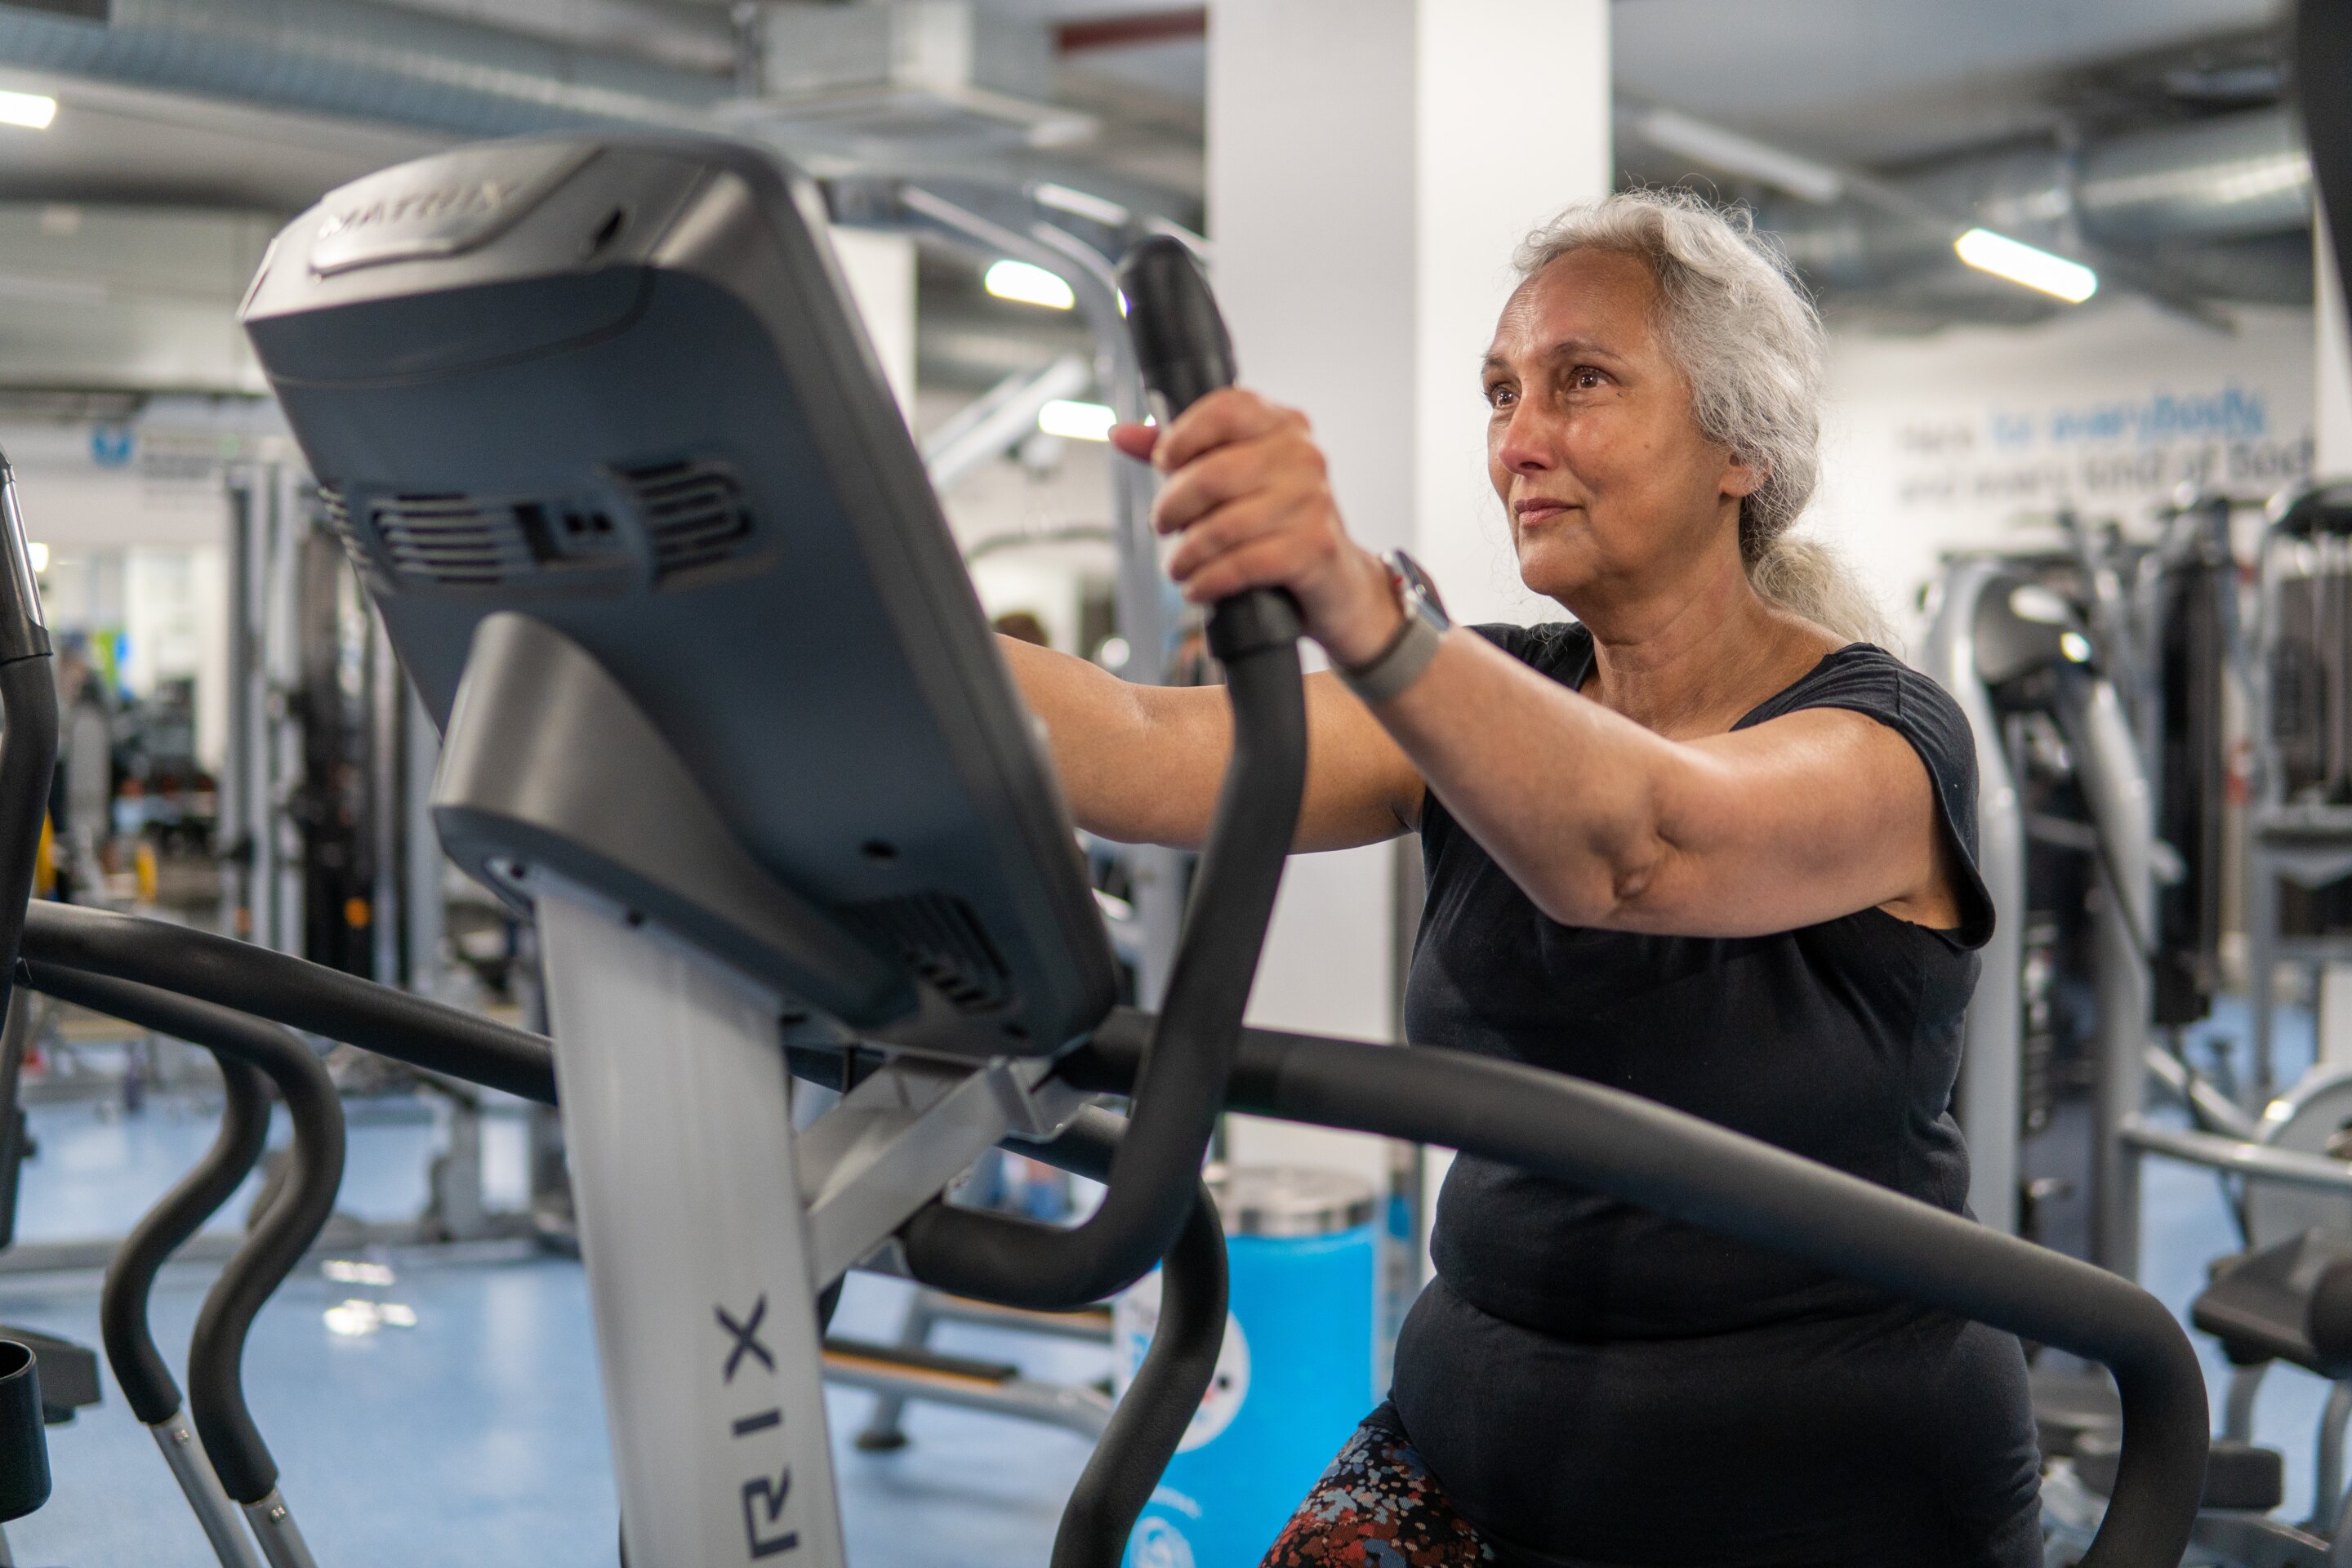 Intervention program increases exercise and health outcomes in older adults